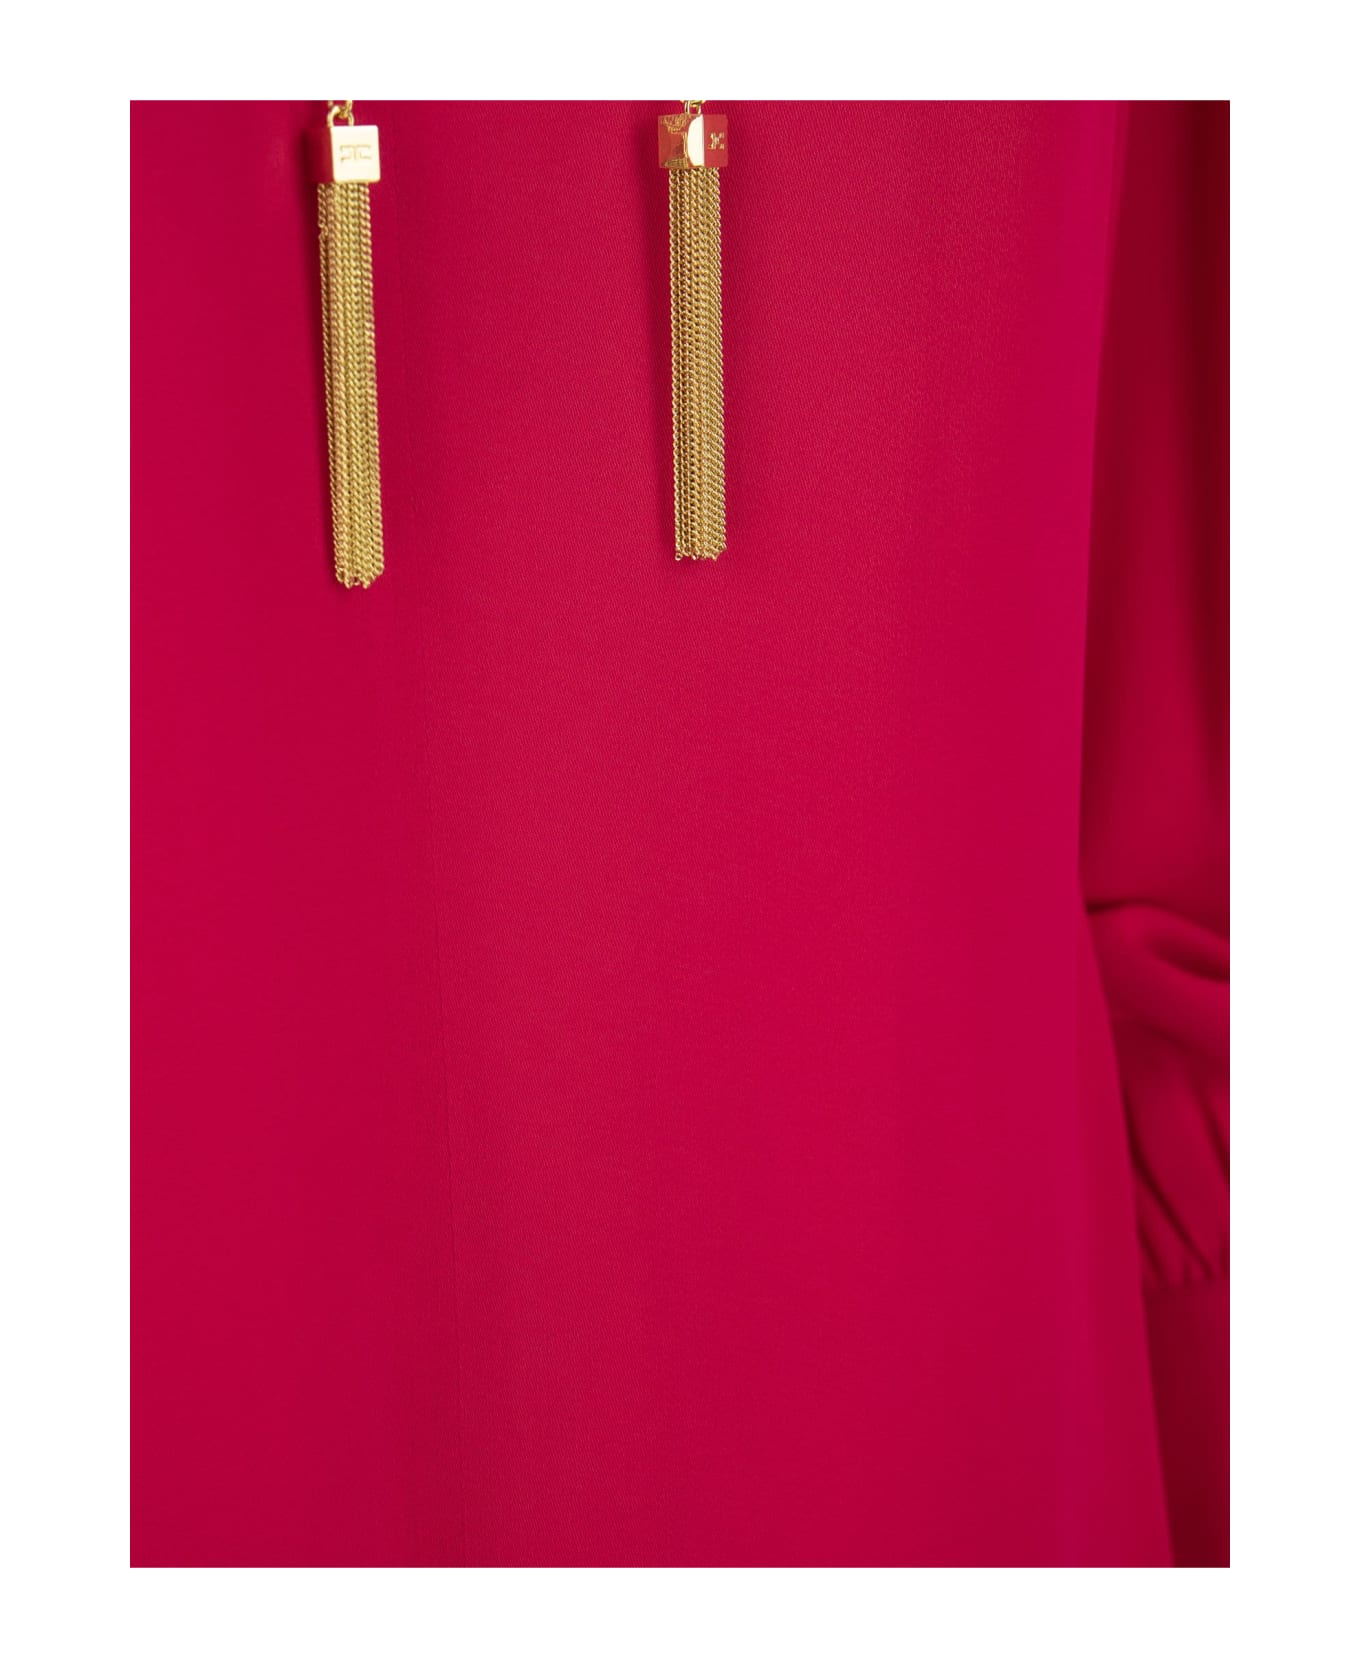 Elisabetta Franchi Georgette Shirt With Stand-up Collar - Fuxia